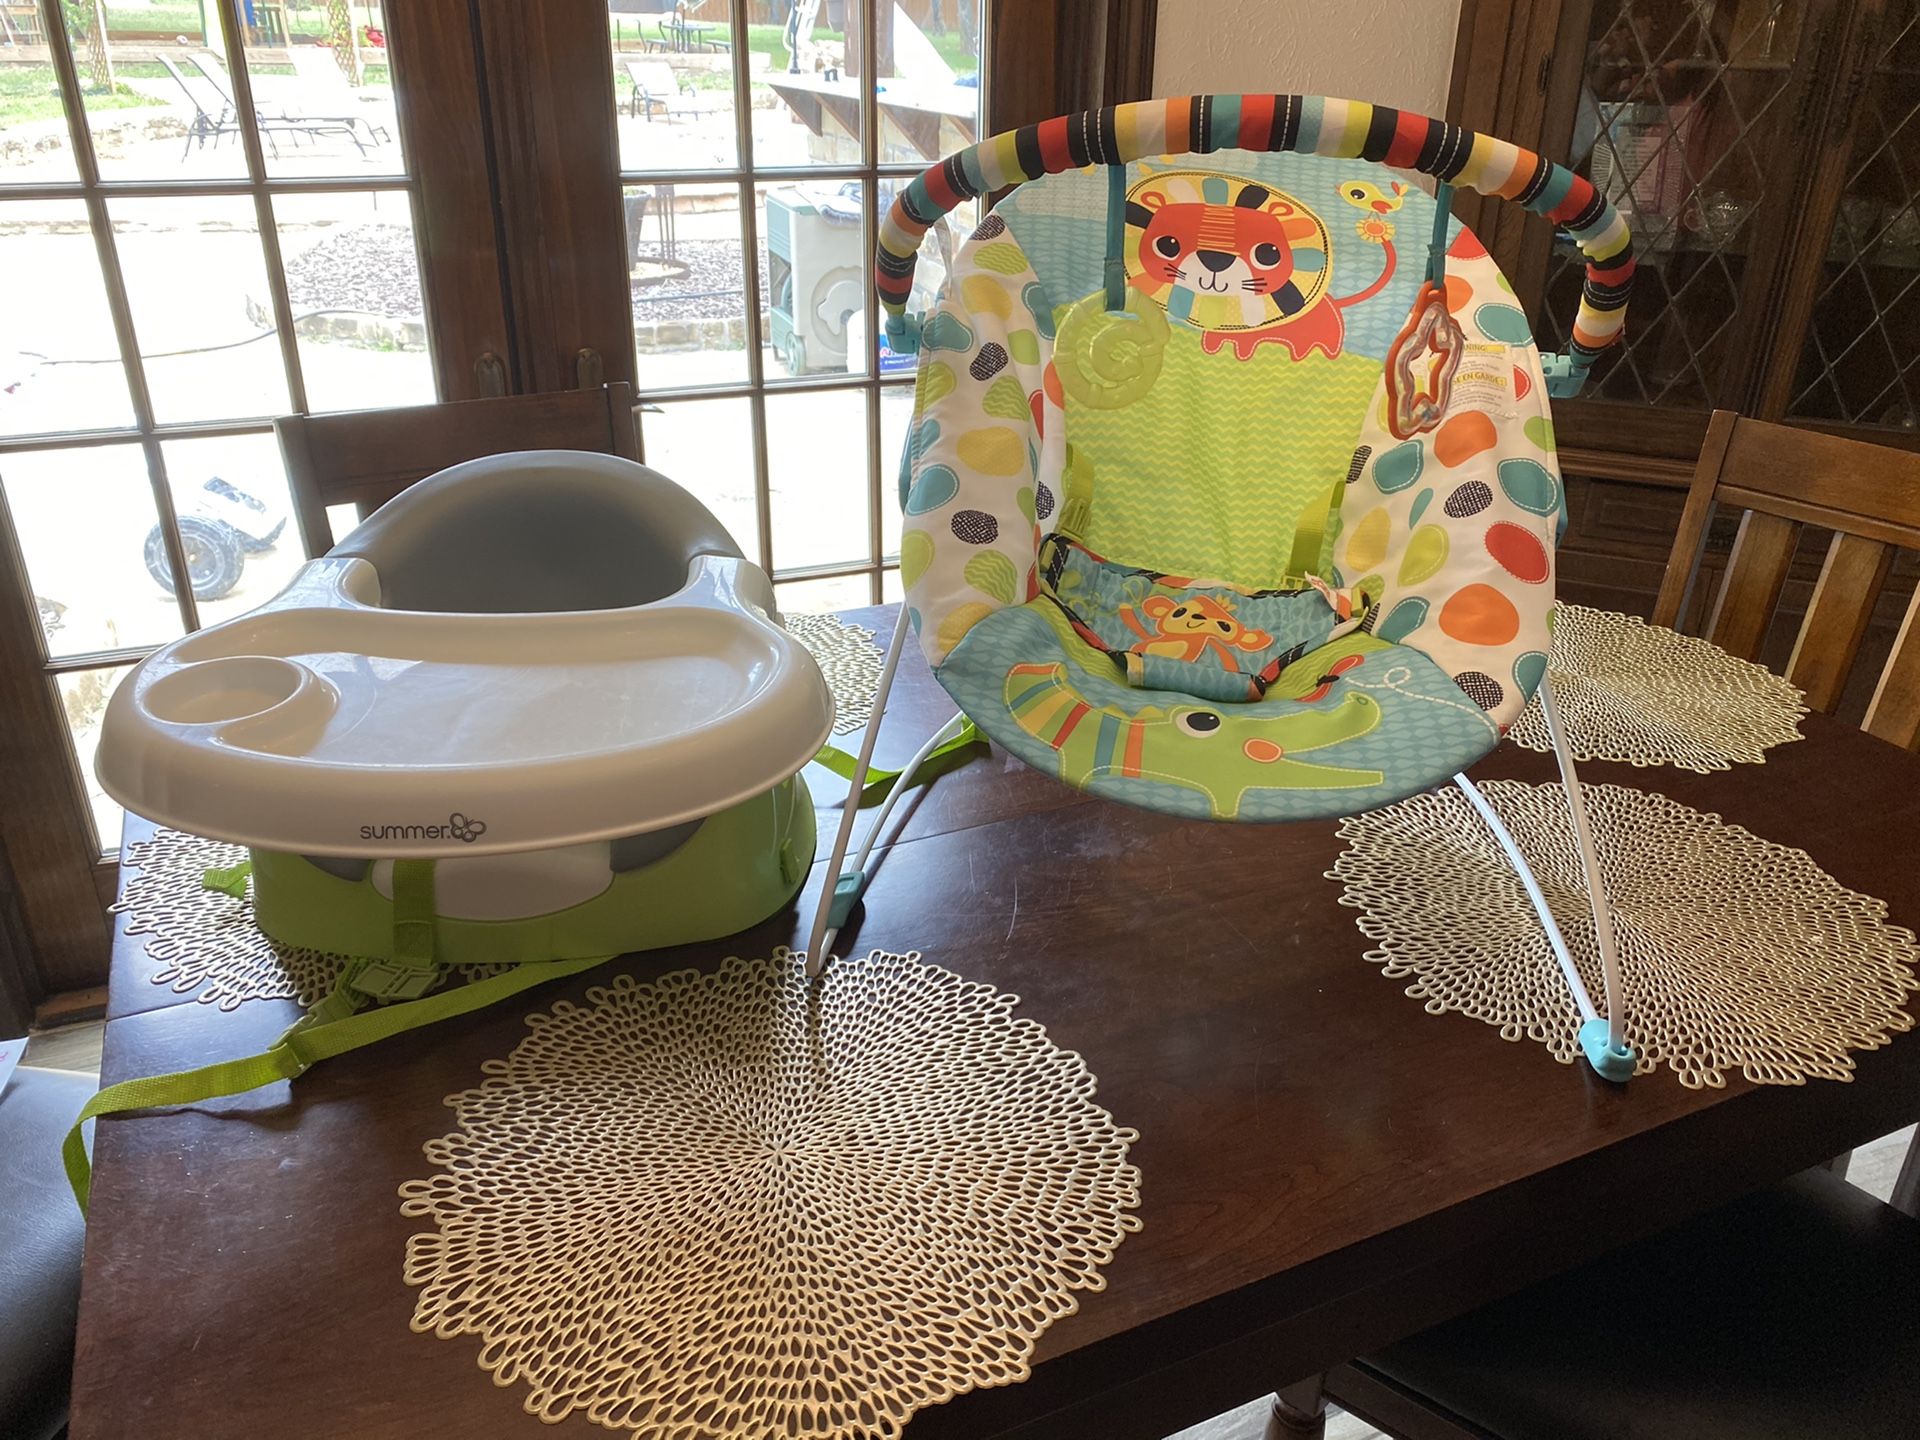 Two baby seat, swing bright stars and Summer seat